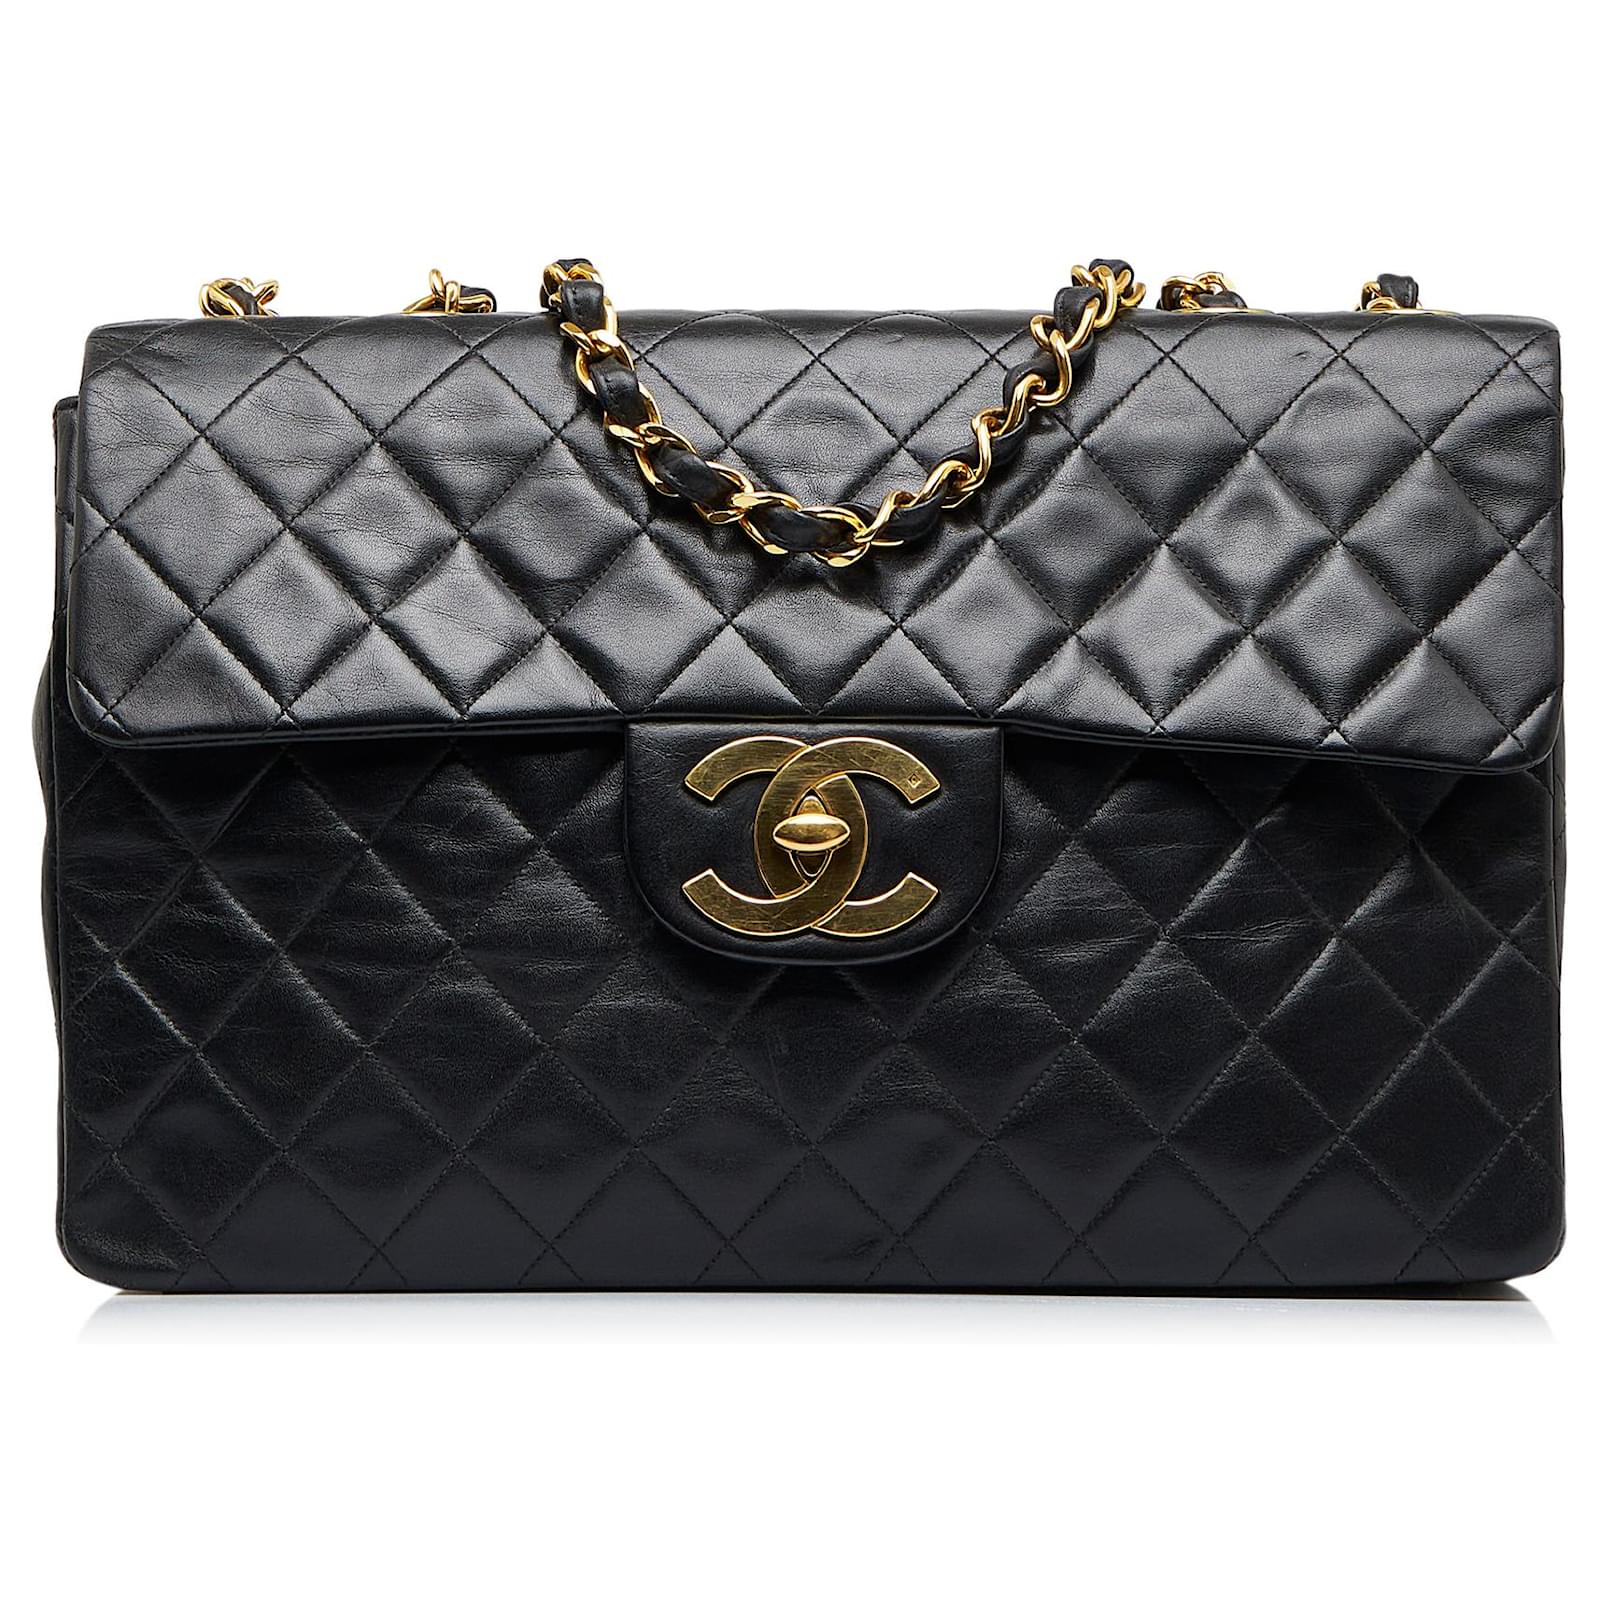 At Auction: CHANEL - Classic 08 Single Flap Bag - Blue Quilted